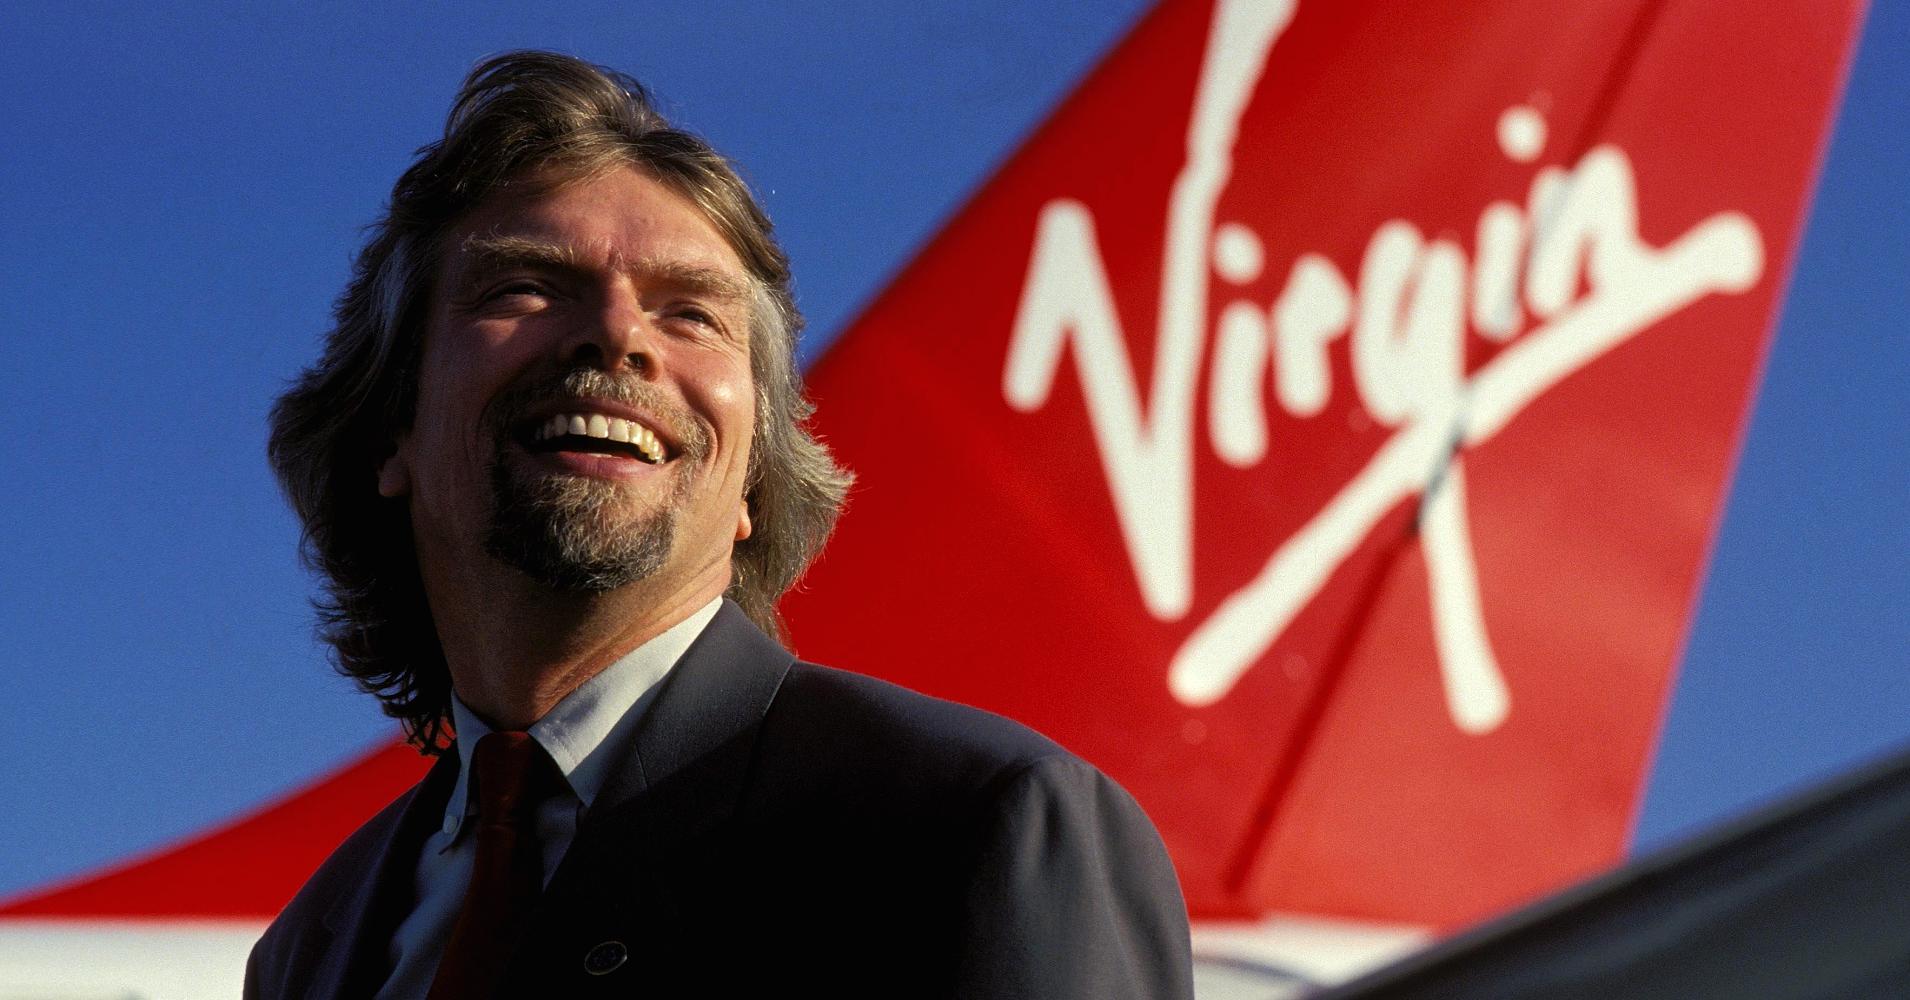 The UK has a long tradition of entrepreneurs such as Richard Branson - and still remains competitive in this area. 